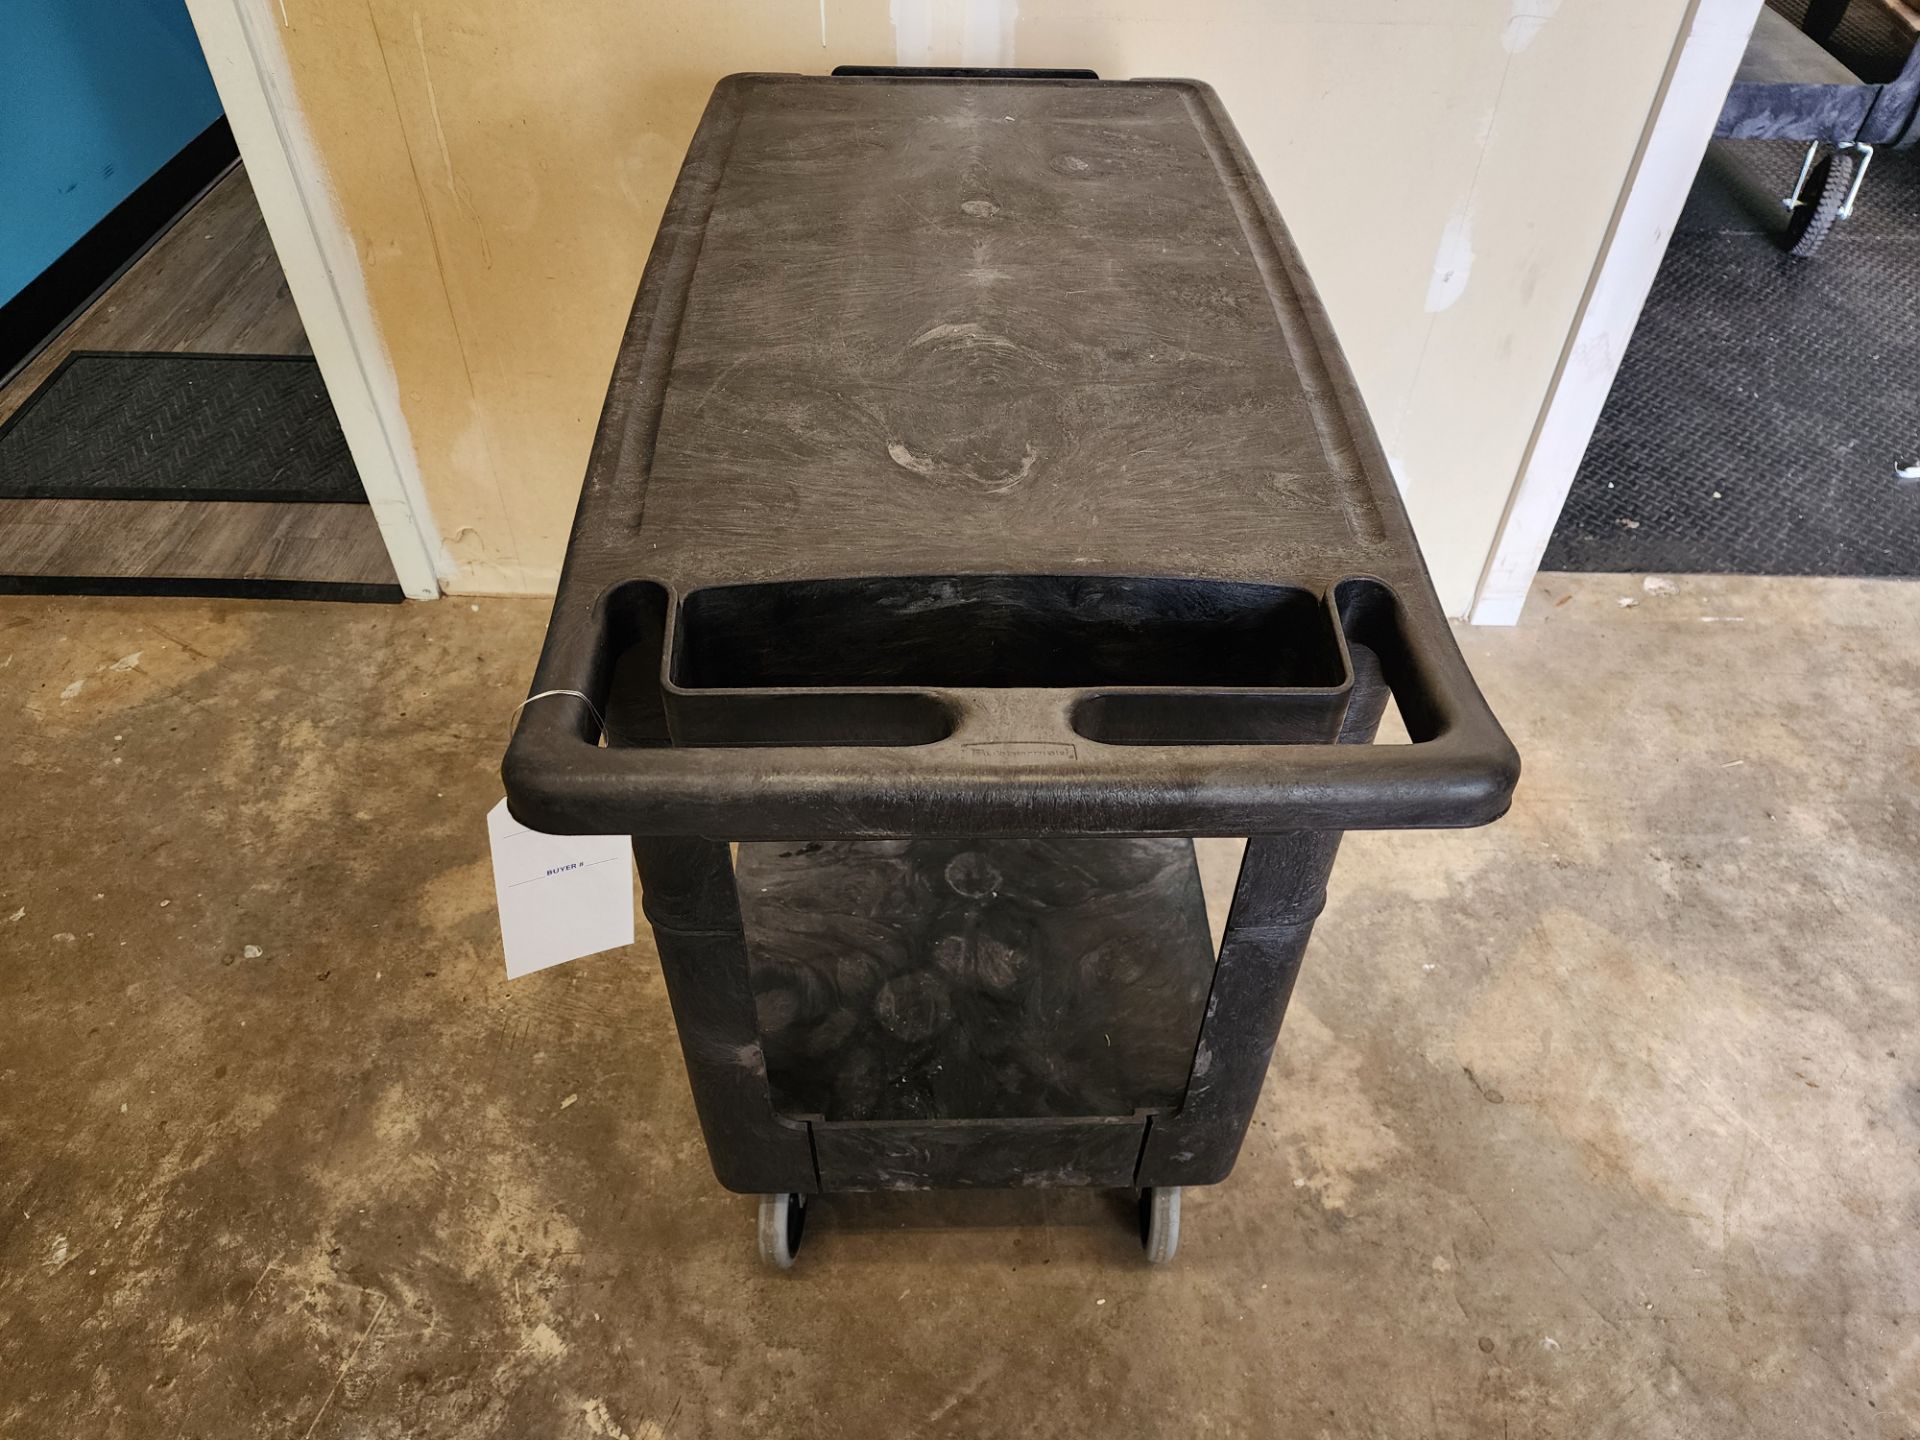 Black Rubbermaid Utility Cart, 2-Tier, 19"x30" - Image 2 of 3